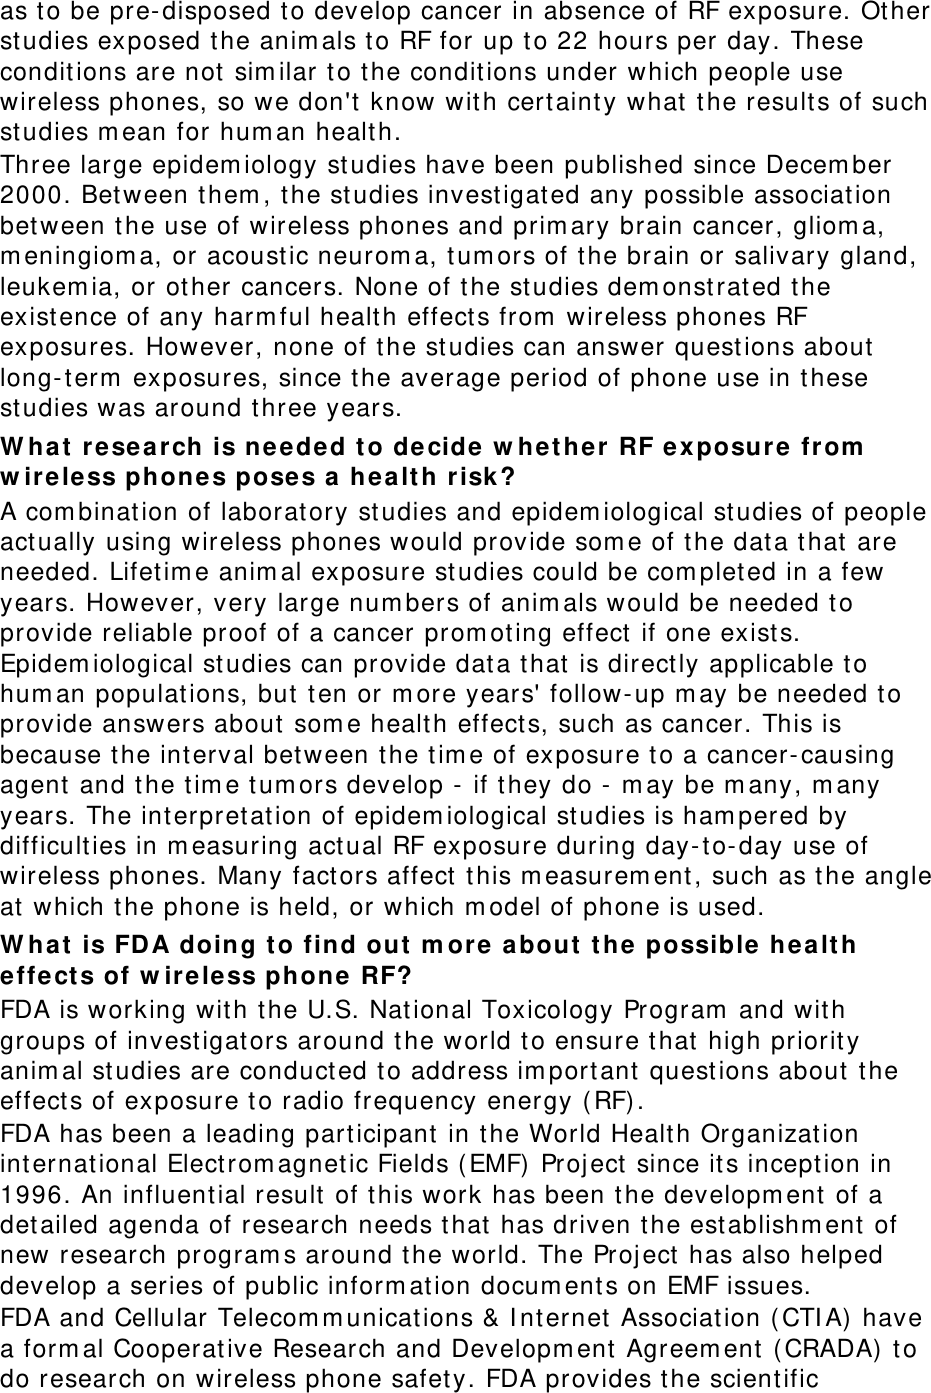 as t o be pre-disposed t o develop cancer in absence of RF exposure. Ot her studies exposed the anim als t o RF for up t o 22 hours per day. These conditions are not sim ilar t o t he conditions under which people use wireless phones, so we don&apos;t know wit h cert aint y what  t he results of such studies m ean for hum an healt h. Three large epidem iology st udies have been published since Decem ber 2000. Bet ween them , t he studies invest igated any possible association bet ween the use of wireless phones and prim ary brain cancer, gliom a, m eningiom a, or acoust ic neurom a, tum ors of the brain or salivary gland, leukem ia, or other cancers. None of t he st udies dem onst rated t he existence of any harm ful health effect s from  wireless phones RF exposures. However, none of t he st udies can answer quest ions about long- t erm  exposures, since t he average period of phone use in these studies was around t hree years. W hat  r esea r ch  is needed t o de cide w het her RF e x posure from  w ireless phon e s pose s a hea lt h r isk? A com bination of laboratory st udies and epidem iological studies of people act ually using wireless phones would provide som e of t he data t hat are needed. Lifetim e anim al exposure studies could be com plet ed in a few years. However, very large num bers of anim als would be needed t o provide reliable proof of a cancer prom oting effect  if one exists. Epidem iological studies can provide dat a that  is direct ly applicable t o hum an populat ions, but ten or m ore years&apos; follow- up m ay be needed t o provide answers about  som e health effect s, such as cancer. This is because the int erval between t he t im e of exposure to a cancer- causing agent and t he t im e tum ors develop -  if t hey do -  m ay be m any, m any years. The int erpretat ion of epidem iological studies is ham pered by difficulties in m easuring actual RF exposure during day- t o-day use of wireless phones. Many fact ors affect  t his m easurem ent , such as the angle at  which the phone is held, or which m odel of phone is used. W hat  is FD A doing t o find out  m ore about  t he  possible  hea lt h effect s of w ireless phone  RF? FDA is working with the U.S. National Toxicology Program  and with groups of invest igat ors around the world t o ensure t hat  high priorit y anim al st udies are conduct ed t o address im port ant  questions about  the effect s of exposure to radio frequency energy ( RF). FDA has been a leading participant in t he World Health Organizat ion international Elect rom agnet ic Fields (EMF) Project  since it s incept ion in 1996. An influent ial result of t his work has been t he developm ent  of a det ailed agenda of research needs t hat has driven t he est ablishm ent  of new research program s around the world. The Project  has also helped develop a series of public inform ation docum ent s on EMF issues. FDA and Cellular Telecom m unicat ions &amp; I nternet  Association ( CTI A)  have a form al Cooperat ive Research and Developm ent Agreem ent ( CRADA)  t o do research on wireless phone safet y. FDA provides the scient ific 